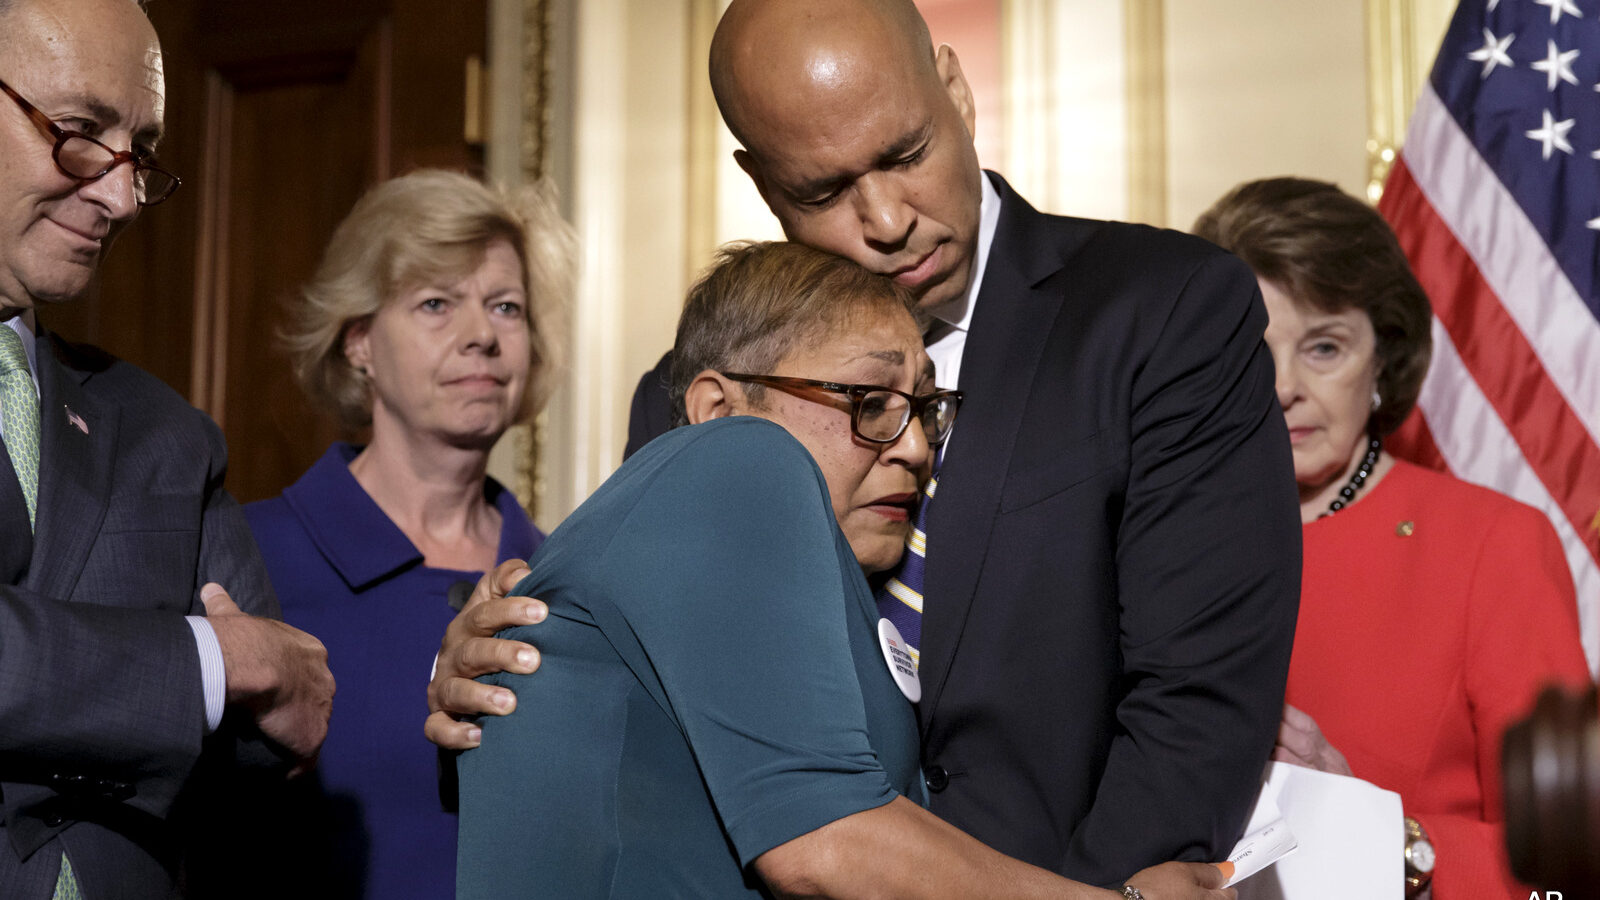 Rev. Sharon Risher, Risher, a clinical trauma chaplain in Dallas, who lost her mother Ethel Lance and two cousins in the racially-motivated shooting at the historic Emanuel AME Church in Charleston, N.C., in 2015, is embraced by Sen. Cory Booker, D-N.J., during a news conference by Democratic senators calling for gun control legislation in the wake of the mass shooting in an Orlando LGBT nightclub this week, Thursday, June 16, 2016, on Capitol Hill in Washington. From left are, Sen. Charles Schumer, D-N.Y., Sen. Tammy Baldwin, D-Wis., and Sen. Dianne Feinstein, D-Calif. (AP Photo/J. Scott Applewhite)